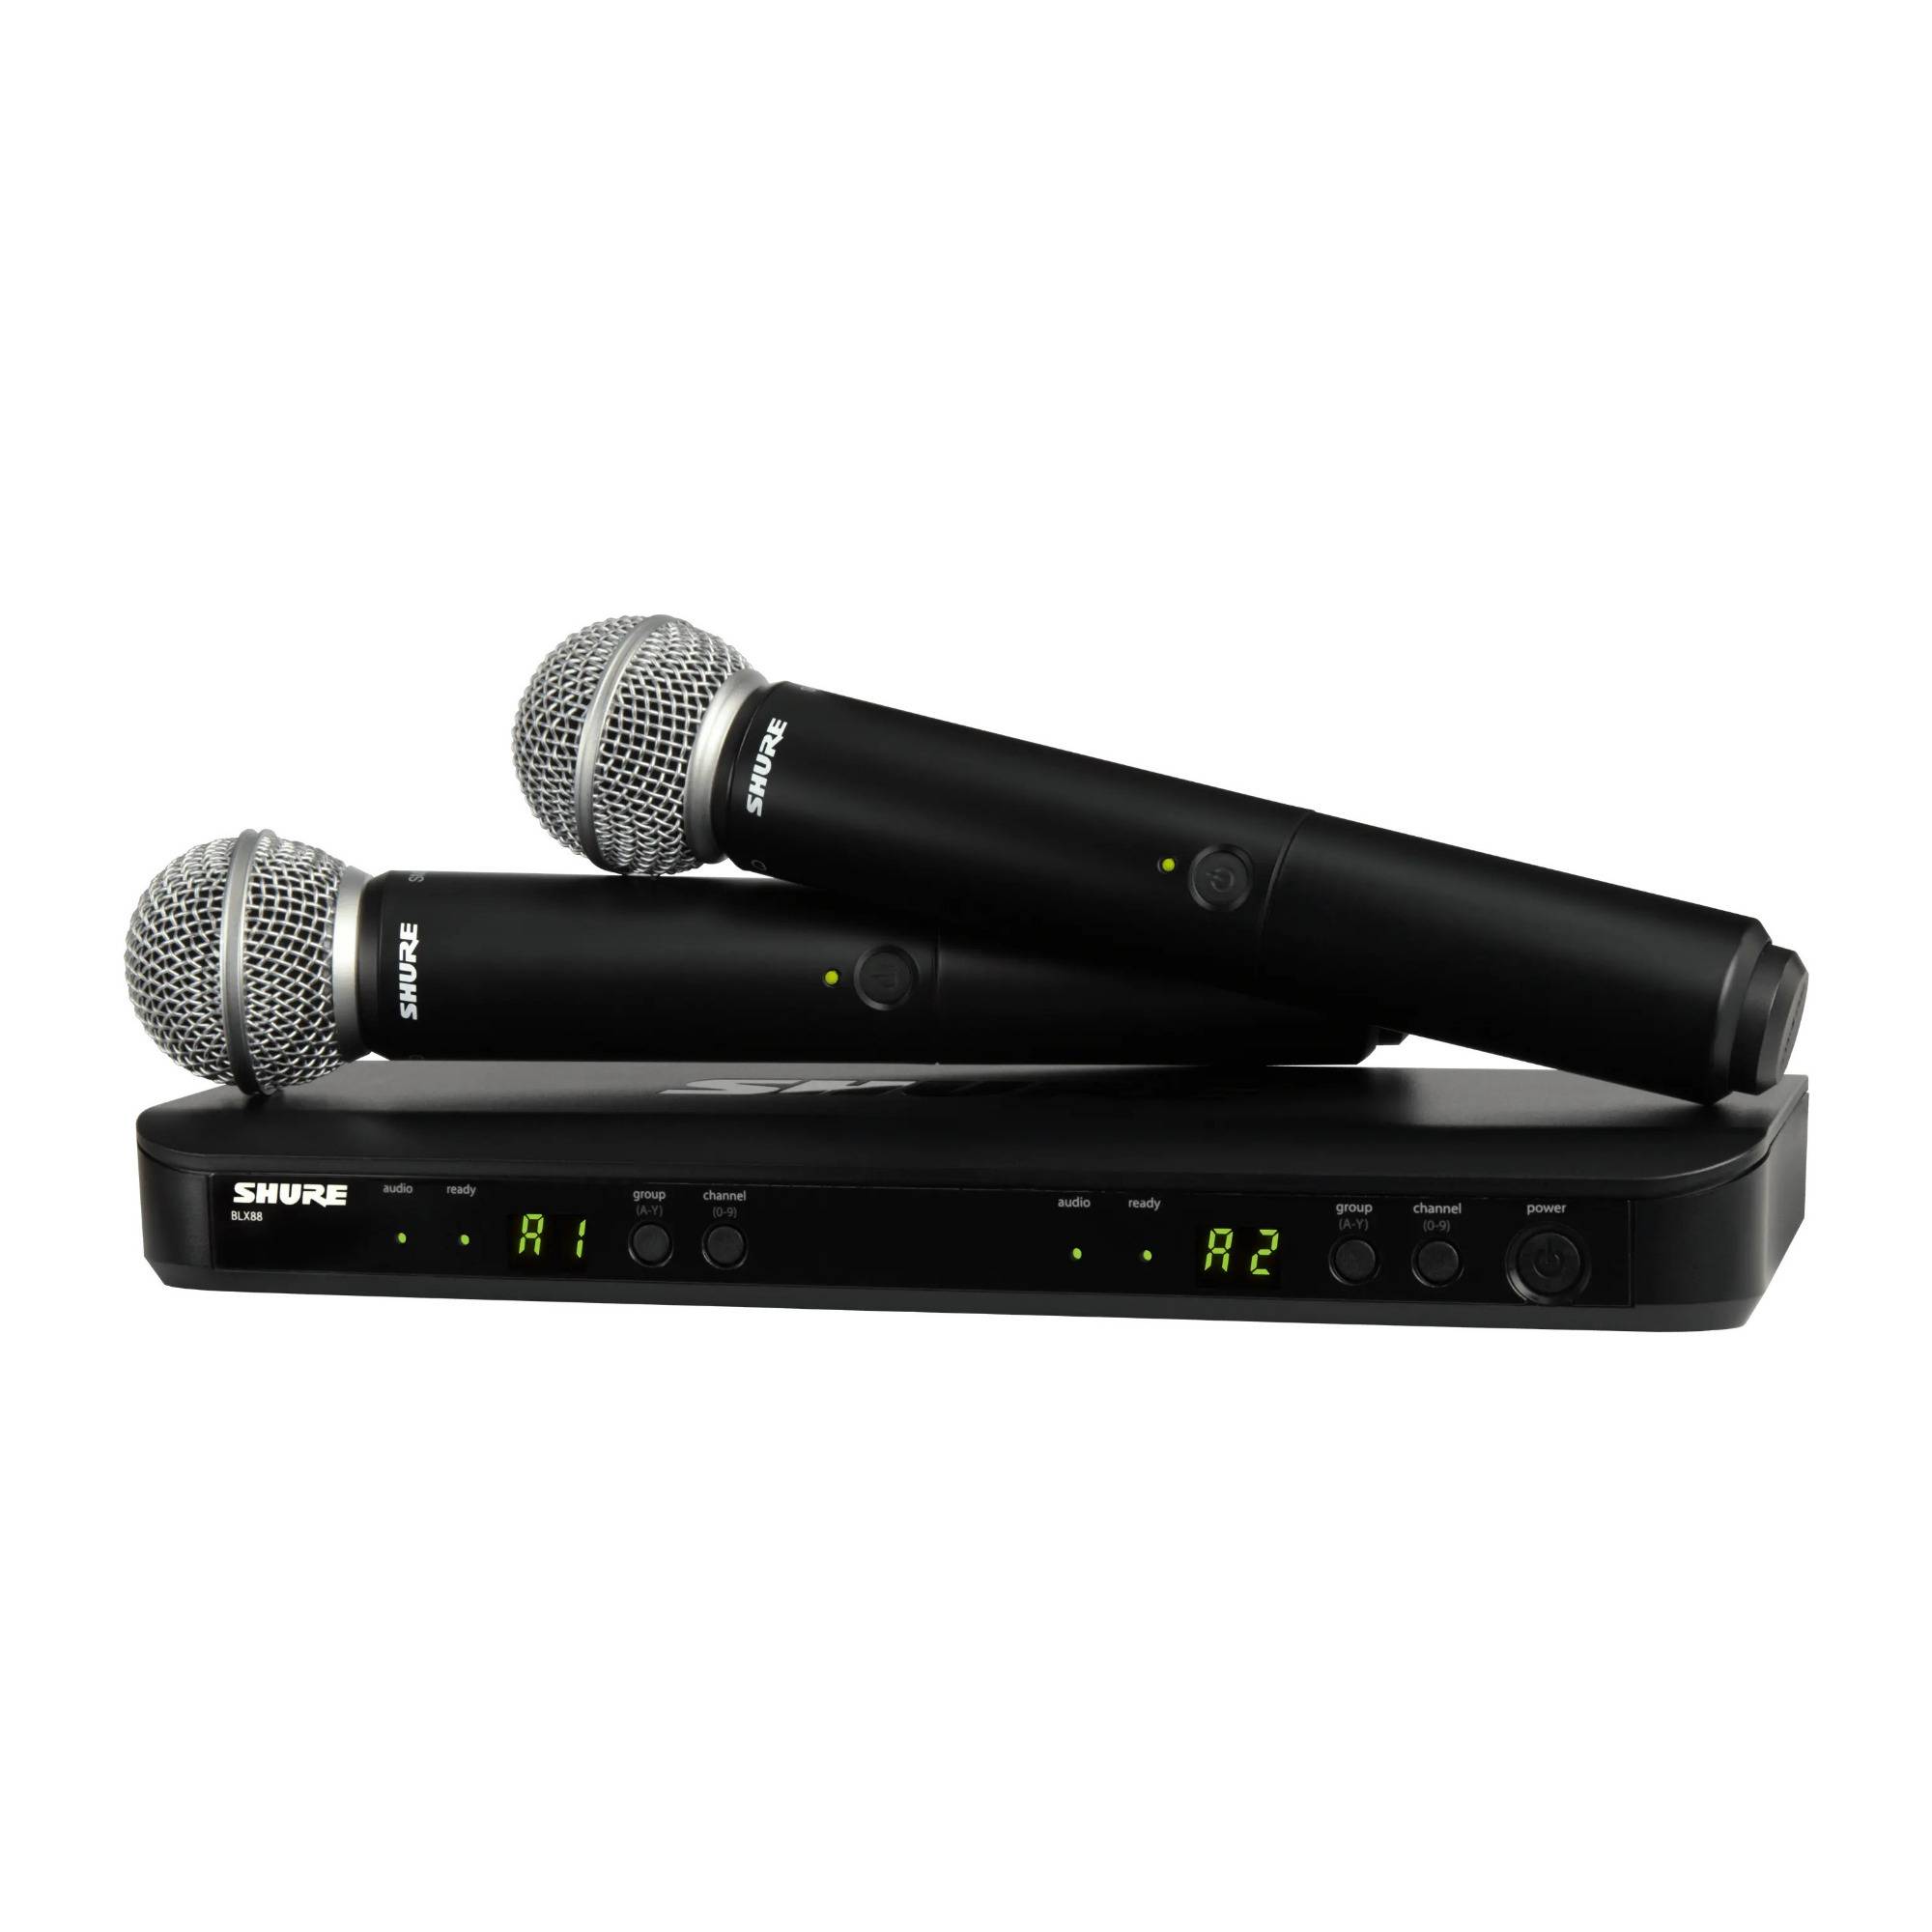 Shure BLX288/SM58 J11 Frequency Band Easy to Setup Wireless Dual Microphone System (Silver)